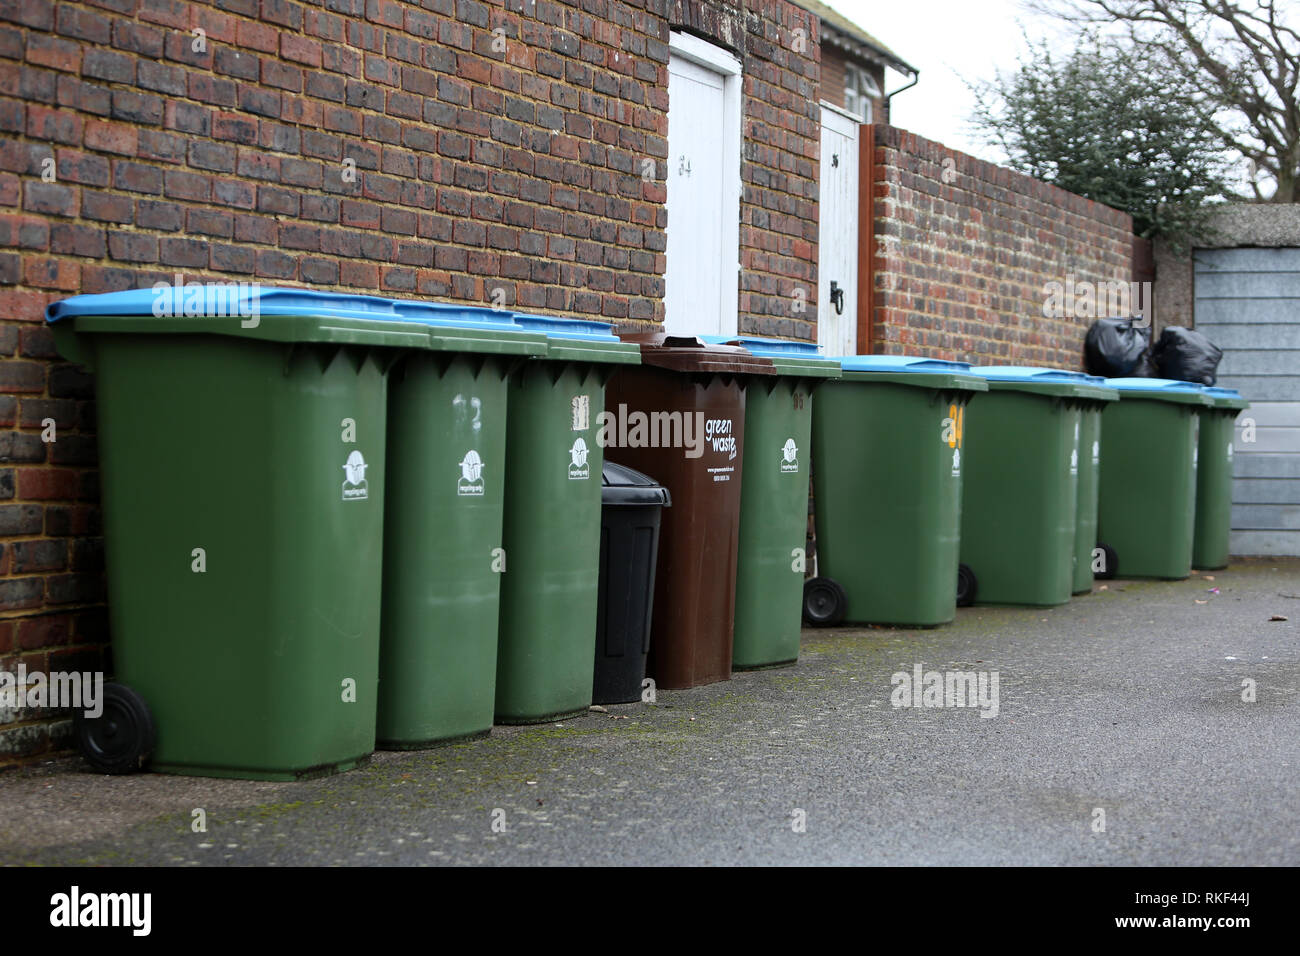 General view of some domestic bins in a street in Bognor Regis, West Sussex, UK. Stock Photo